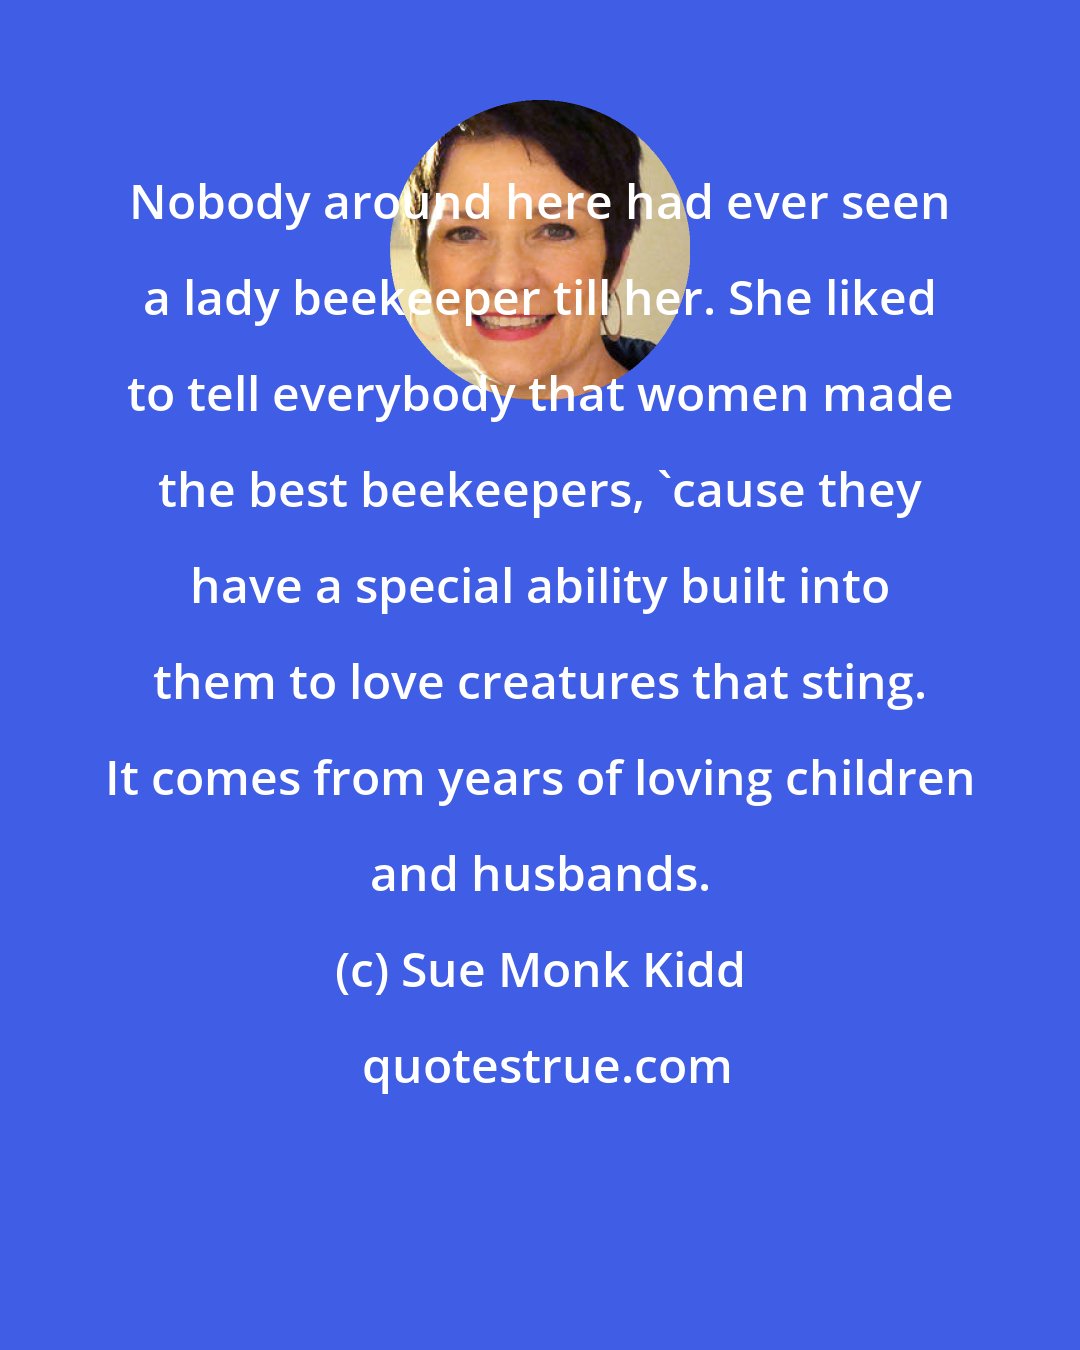 Sue Monk Kidd: Nobody around here had ever seen a lady beekeeper till her. She liked to tell everybody that women made the best beekeepers, 'cause they have a special ability built into them to love creatures that sting. It comes from years of loving children and husbands.